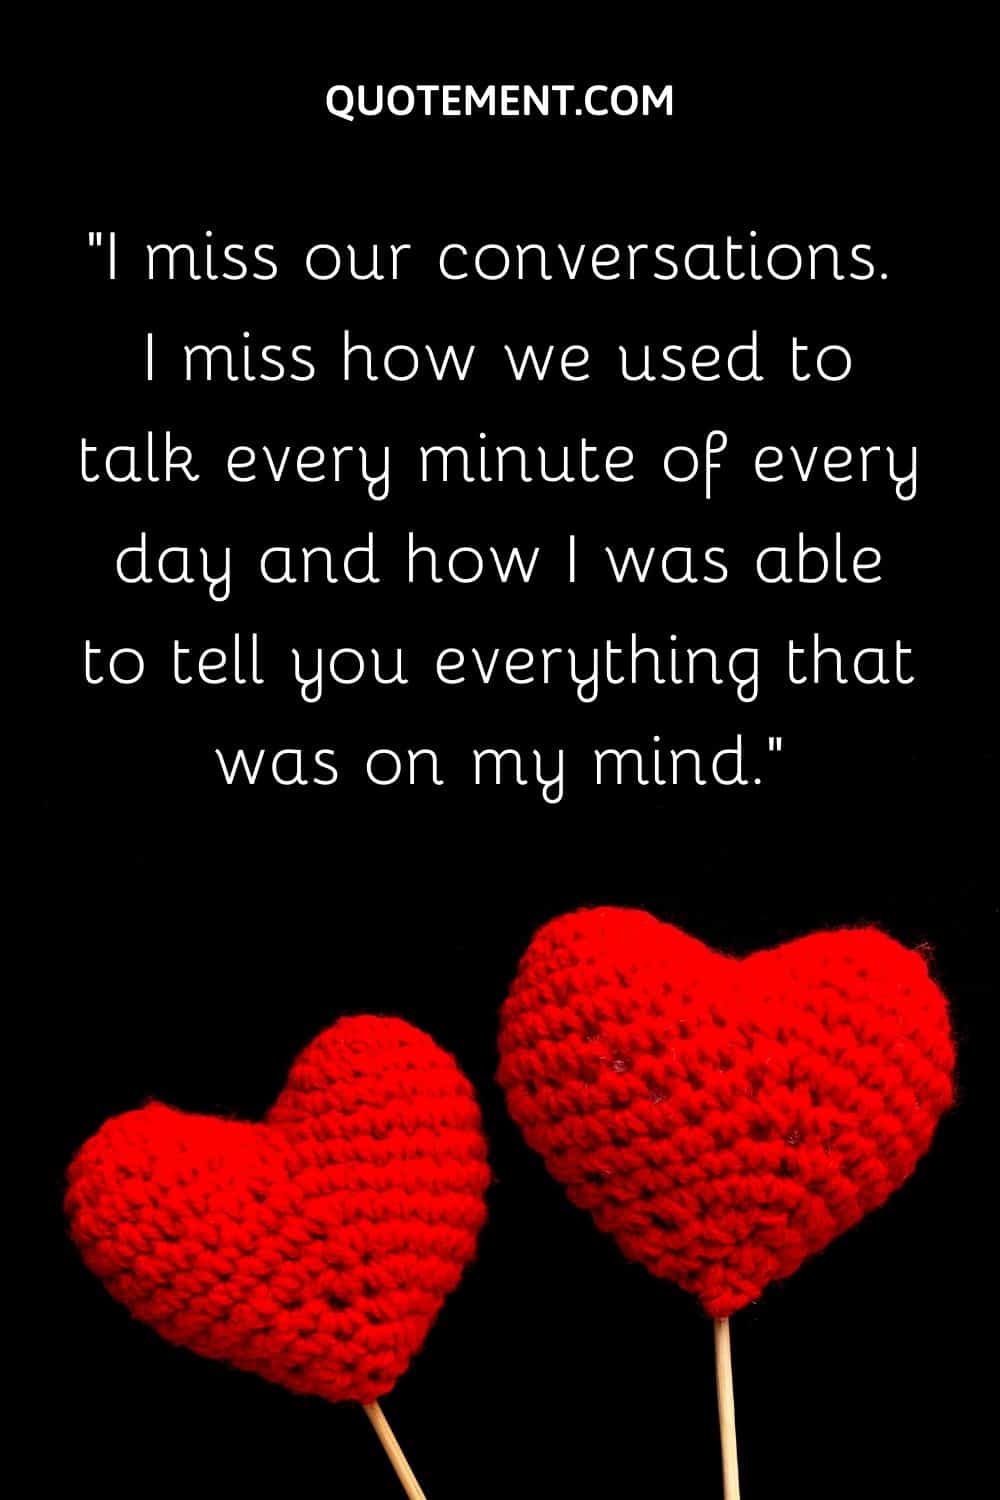 I miss our conversations. I miss how we used to talk every minute of every day and how I was able to tell you everything that was on my mind.